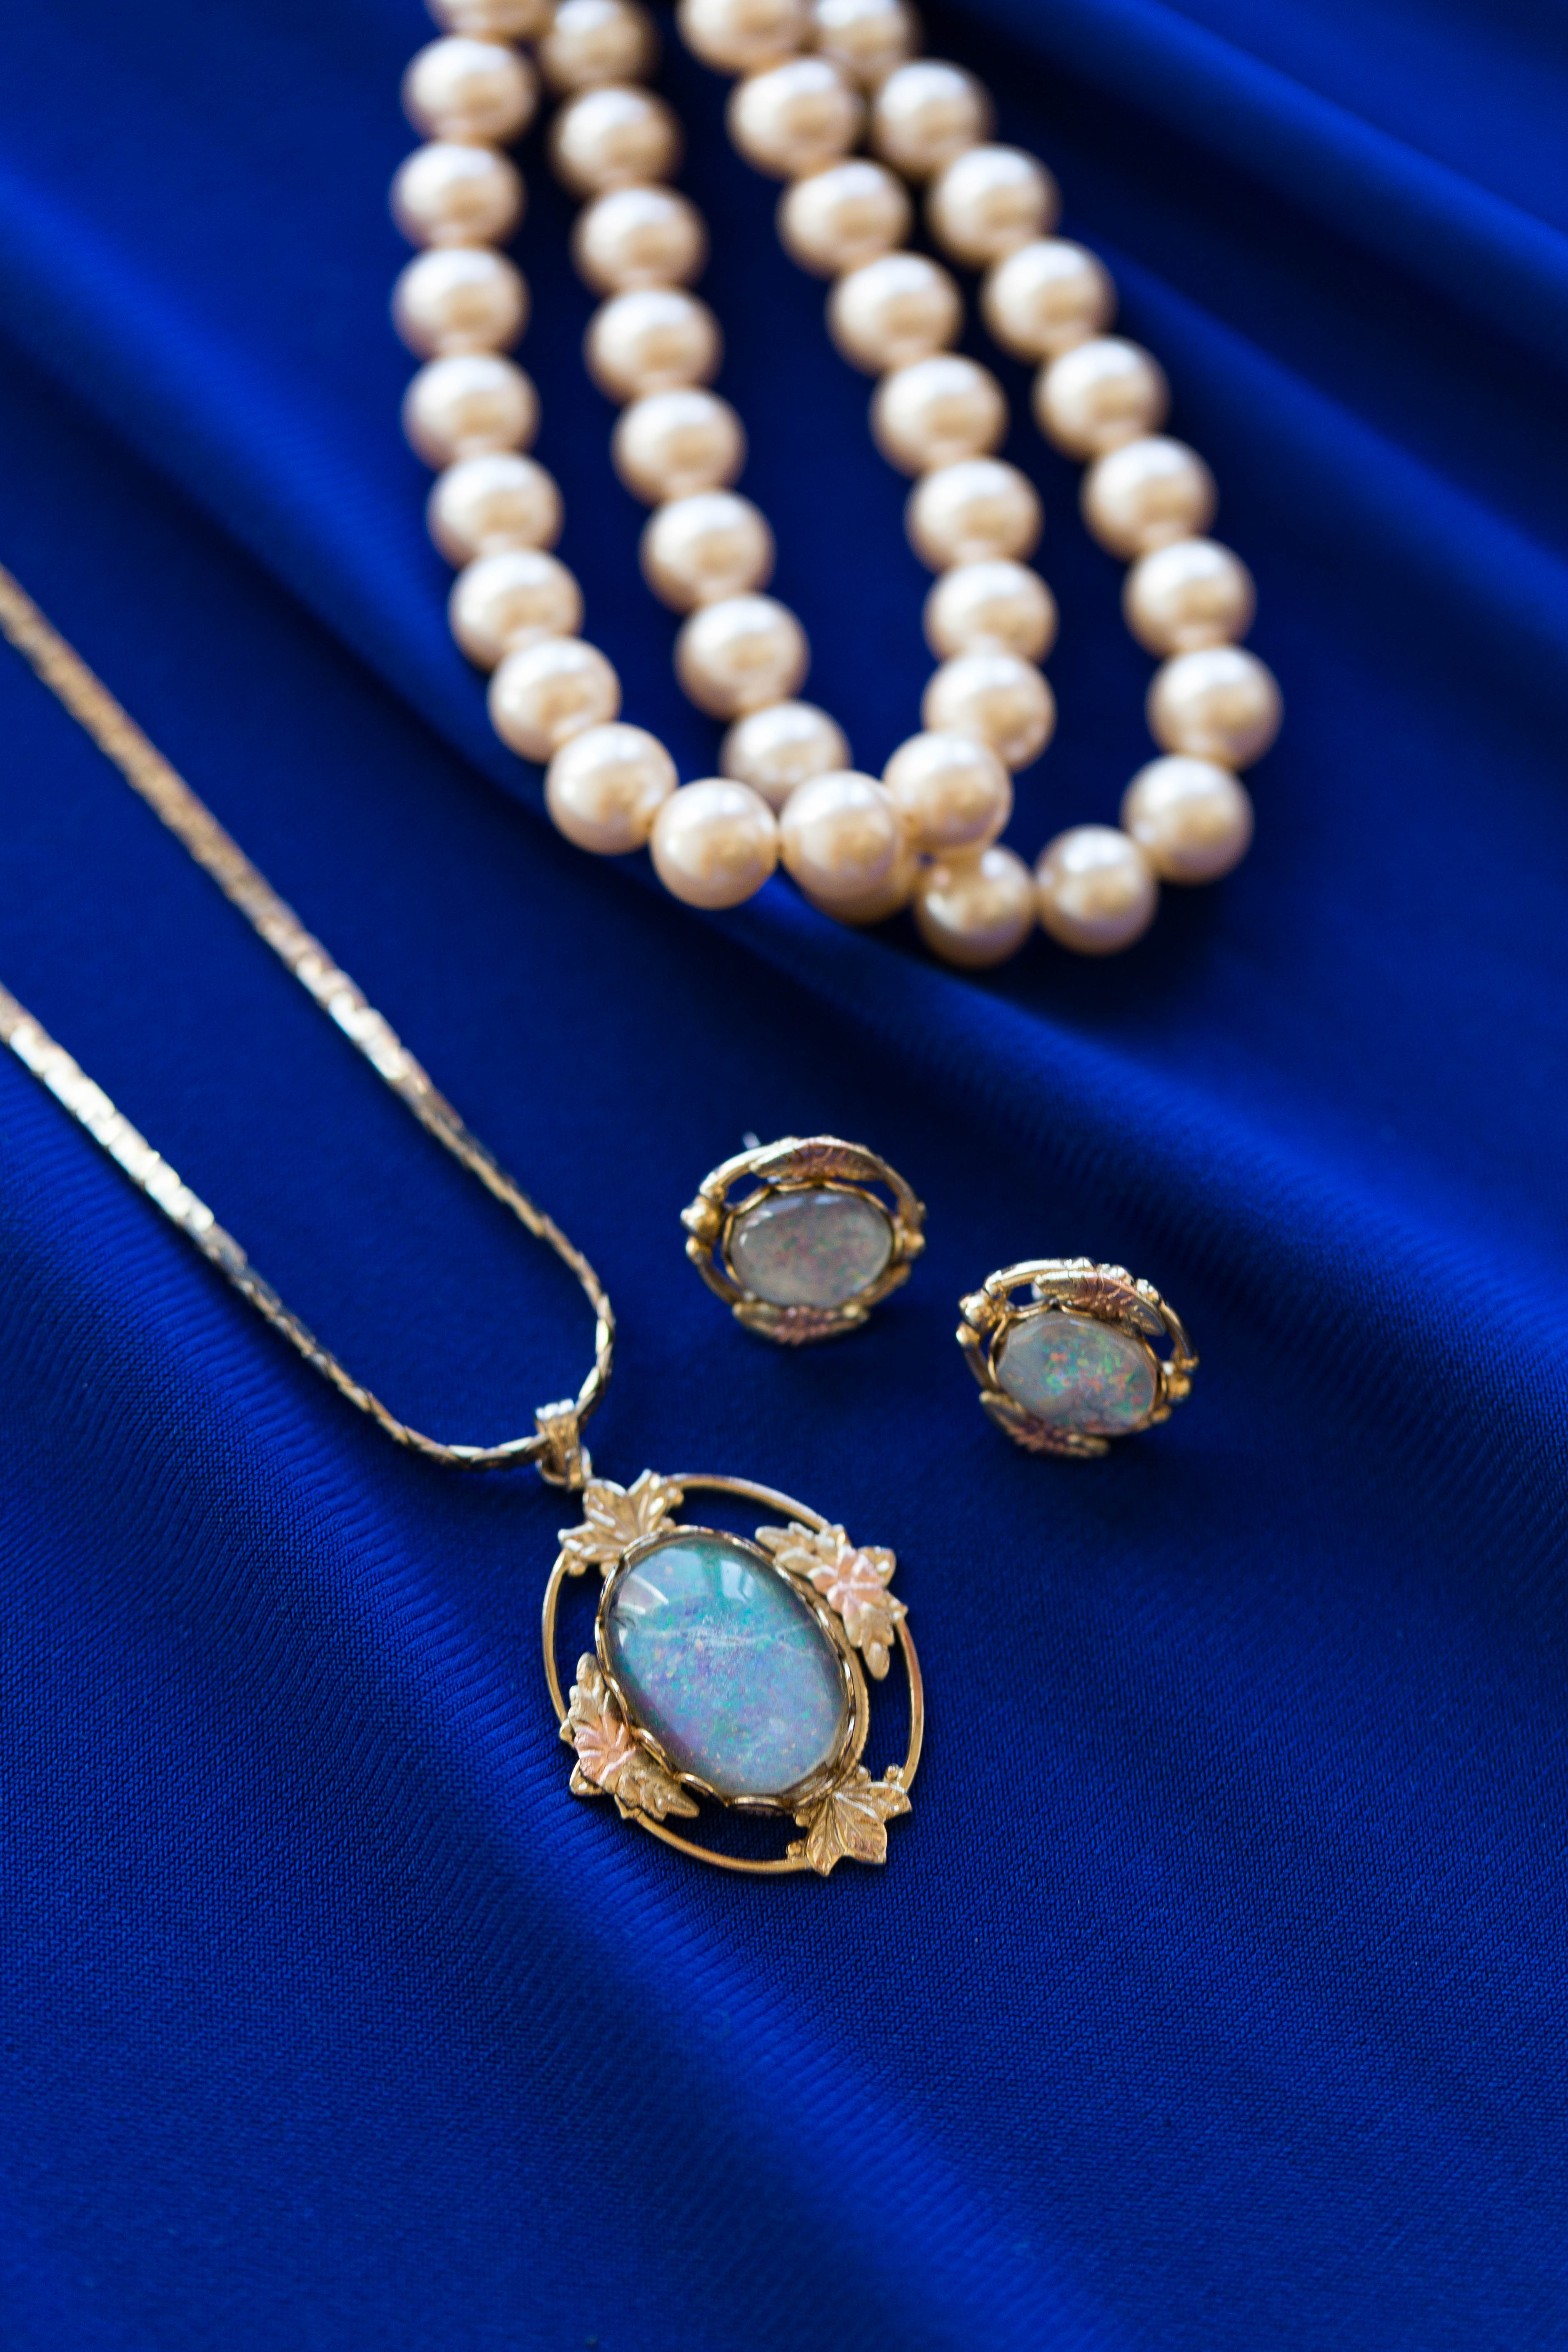 closeup of bride's gold and opal pendant earrings and necklace and pearl bracelet